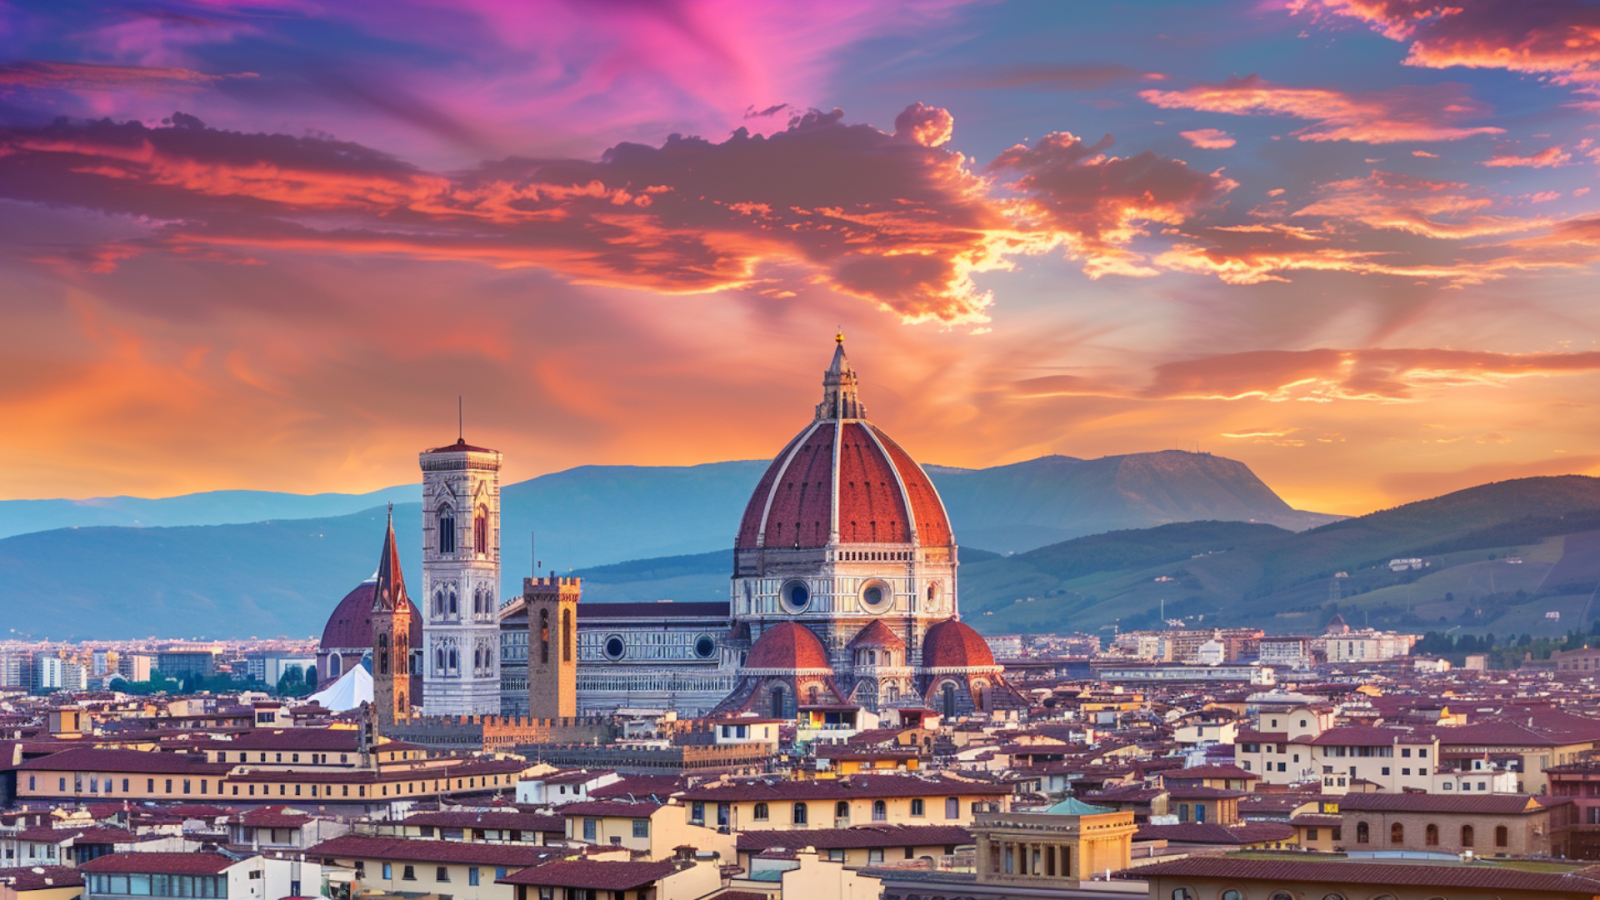 The Duomo underneath colorful sunset skies in Florence, Italy